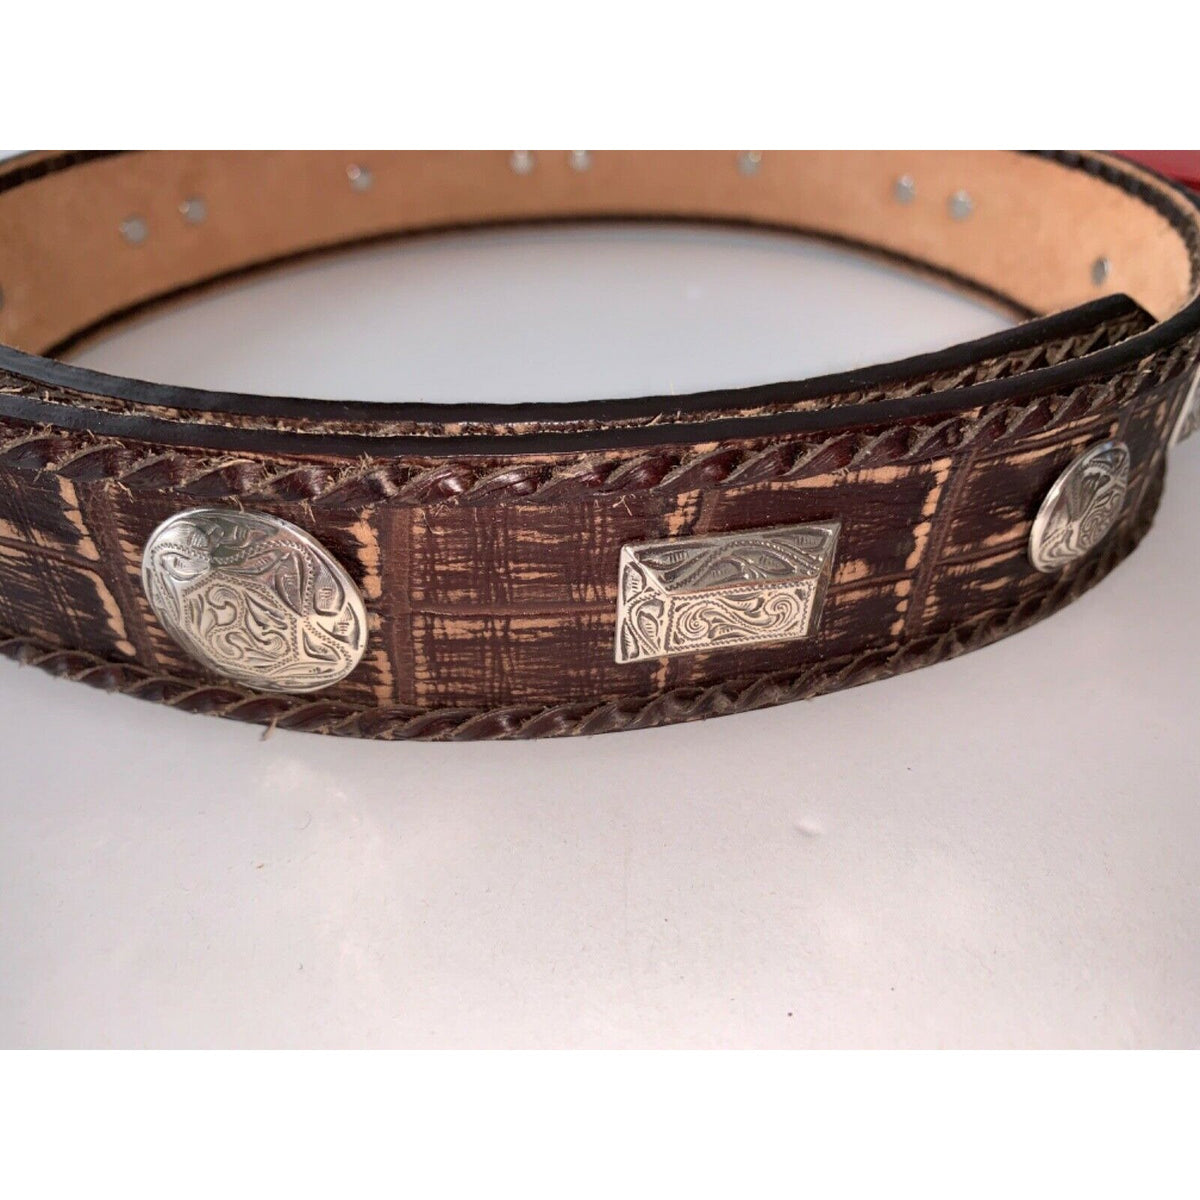 New Brighton Belt 40388 S28 Brown Leather Silver Gold Buckle Decorative  Western